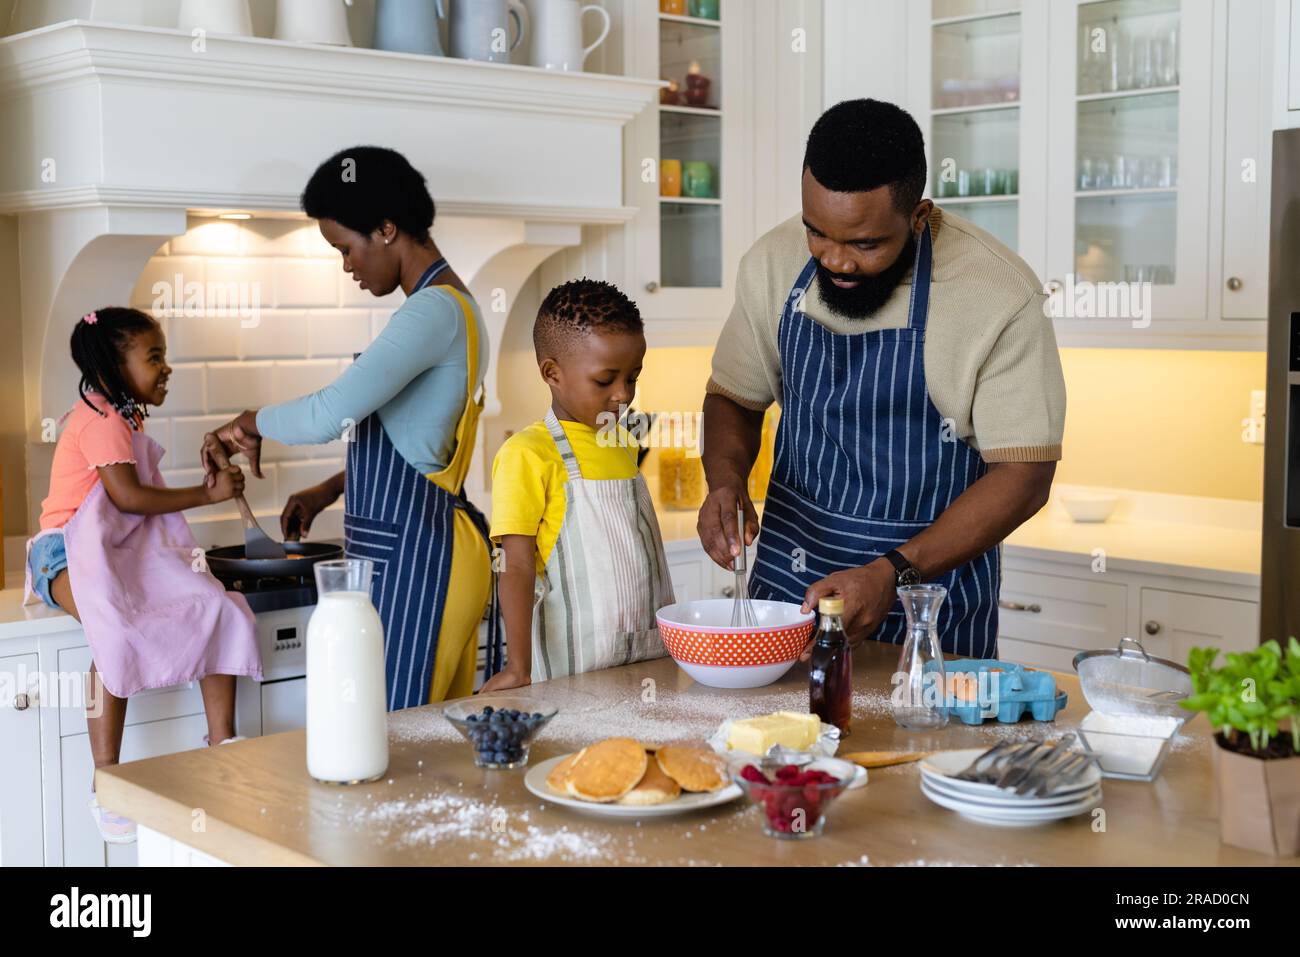 https://c8.alamy.com/comp/2RAD0CN/african-american-father-and-son-mixing-batter-in-bowl-while-mother-and-daughter-cooking-pancakes-2RAD0CN.jpg